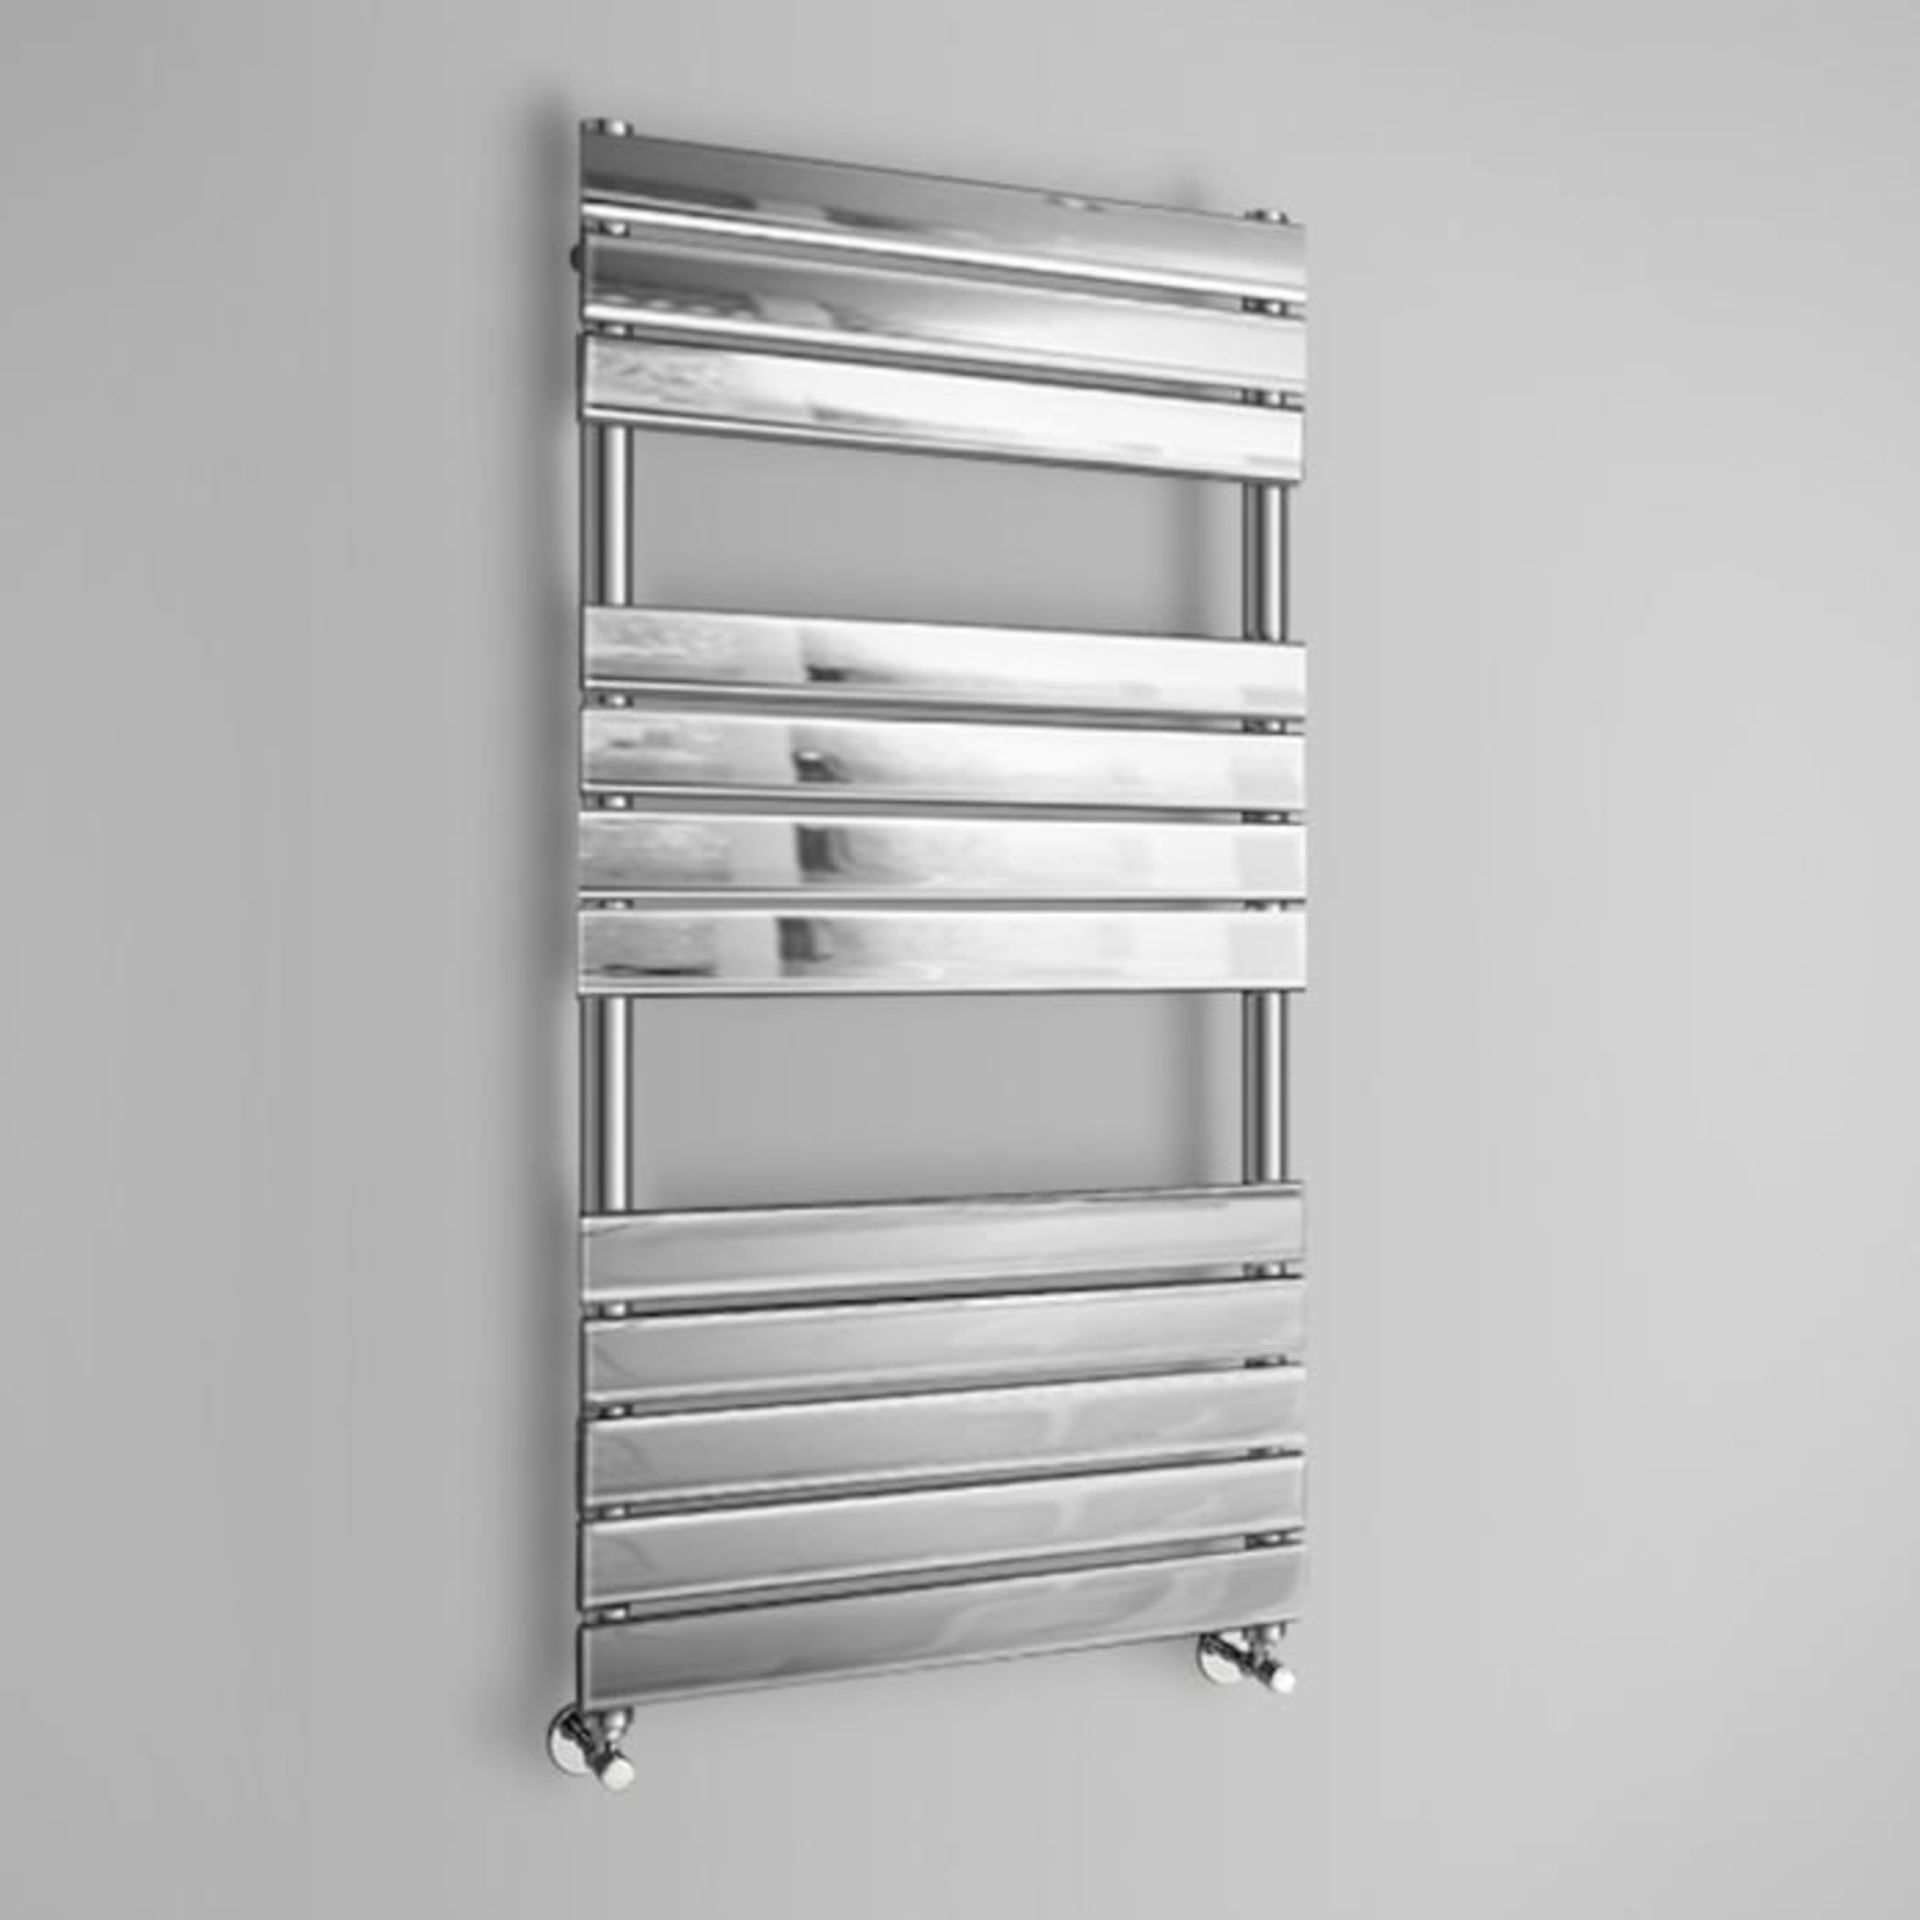 (H204) 1200x600mm Chrome Flat Panel Ladder Towel Radiator. RRP £379.99. Low carbon steel chrome - Image 2 of 6